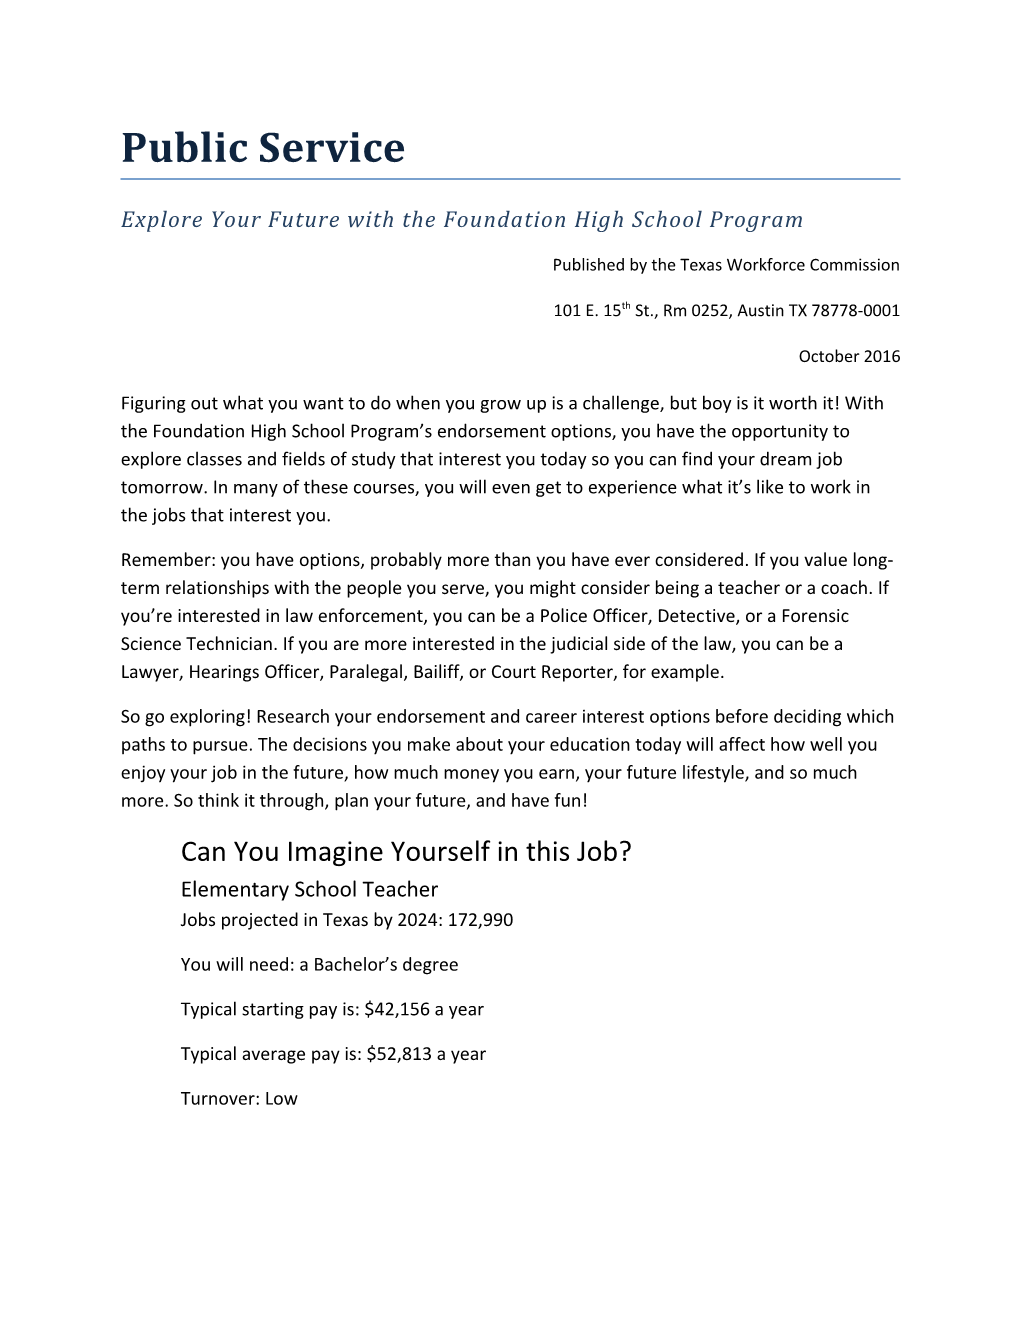 Explore Your Future with the Foundation High School Program